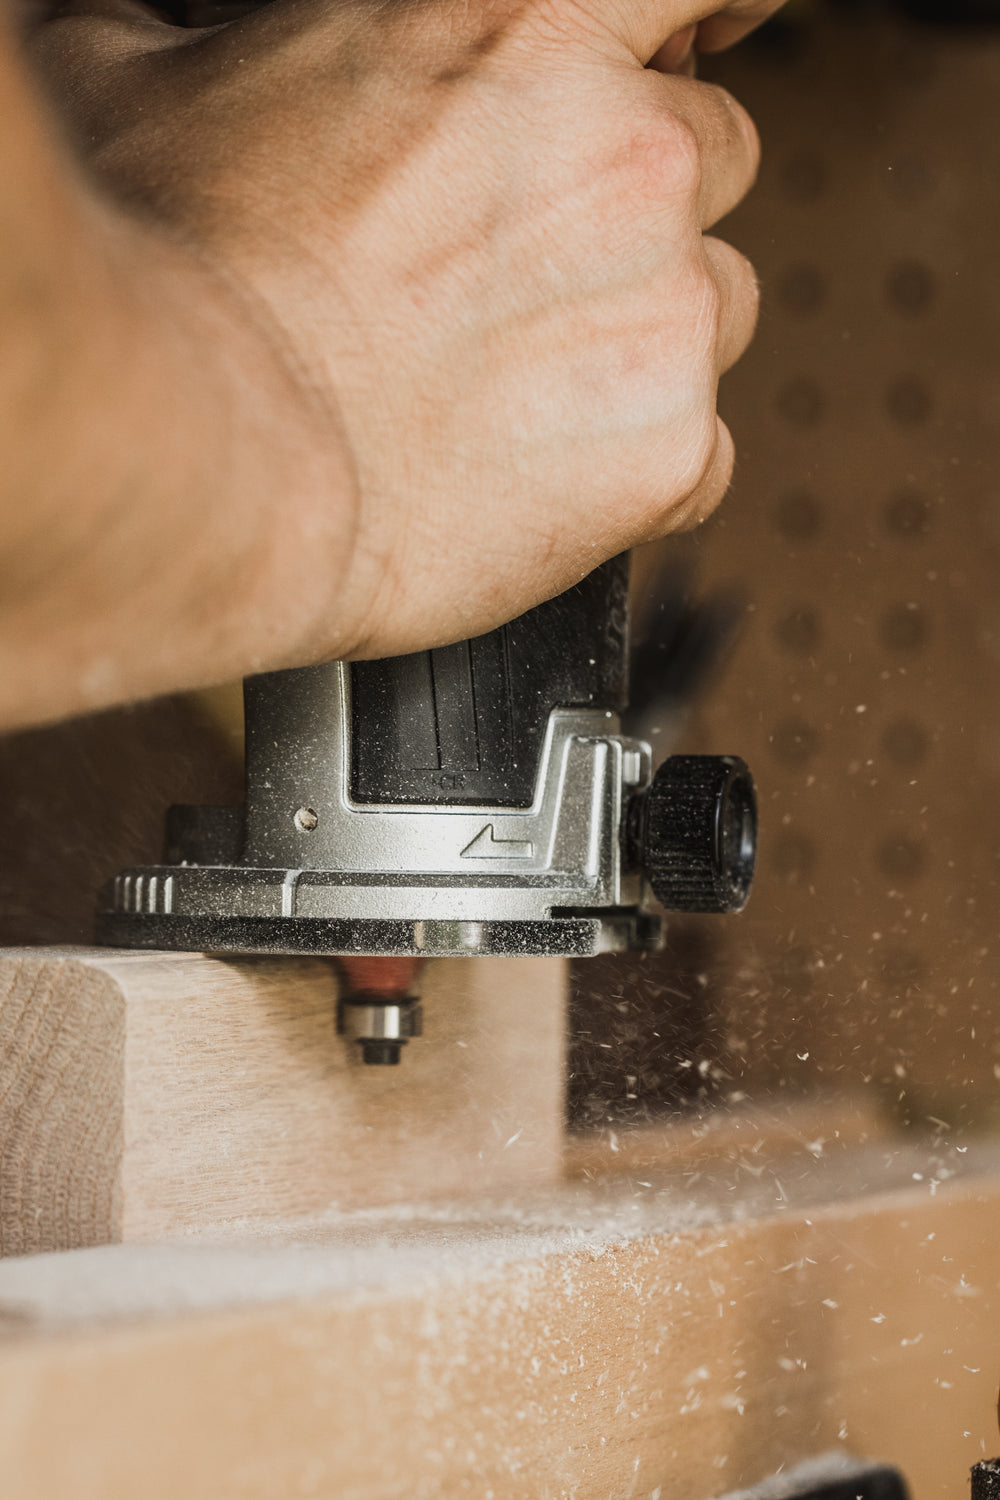 hand-held router shaping wood